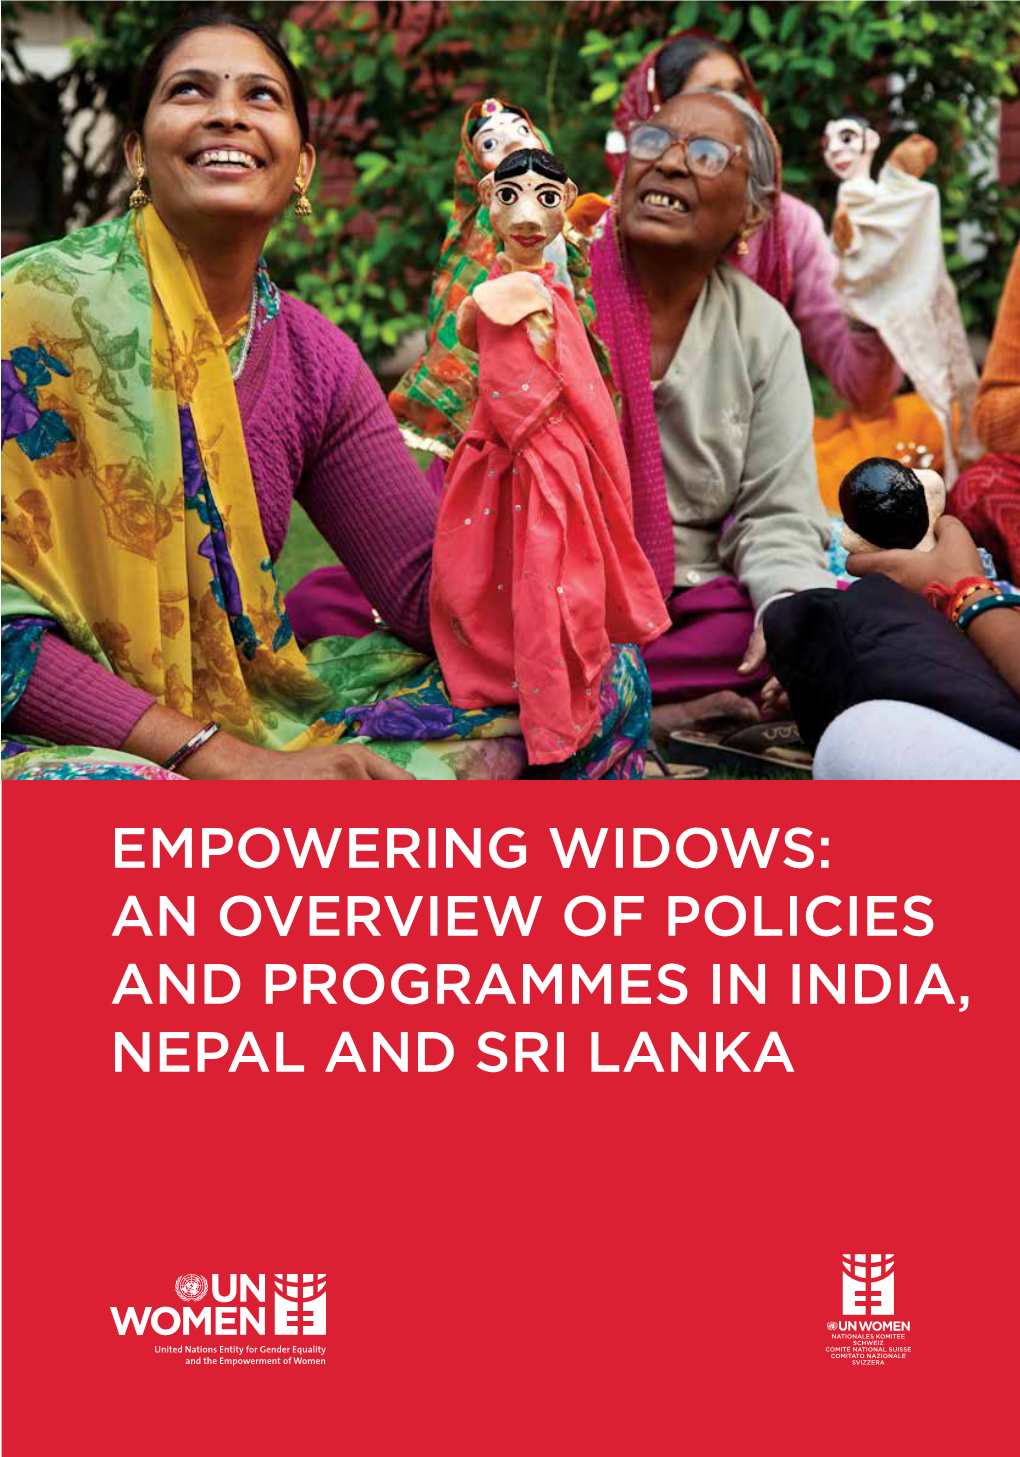 Empowering Widows: an Overview of Policies and Programmes in India, Nepal and Sri Lanka